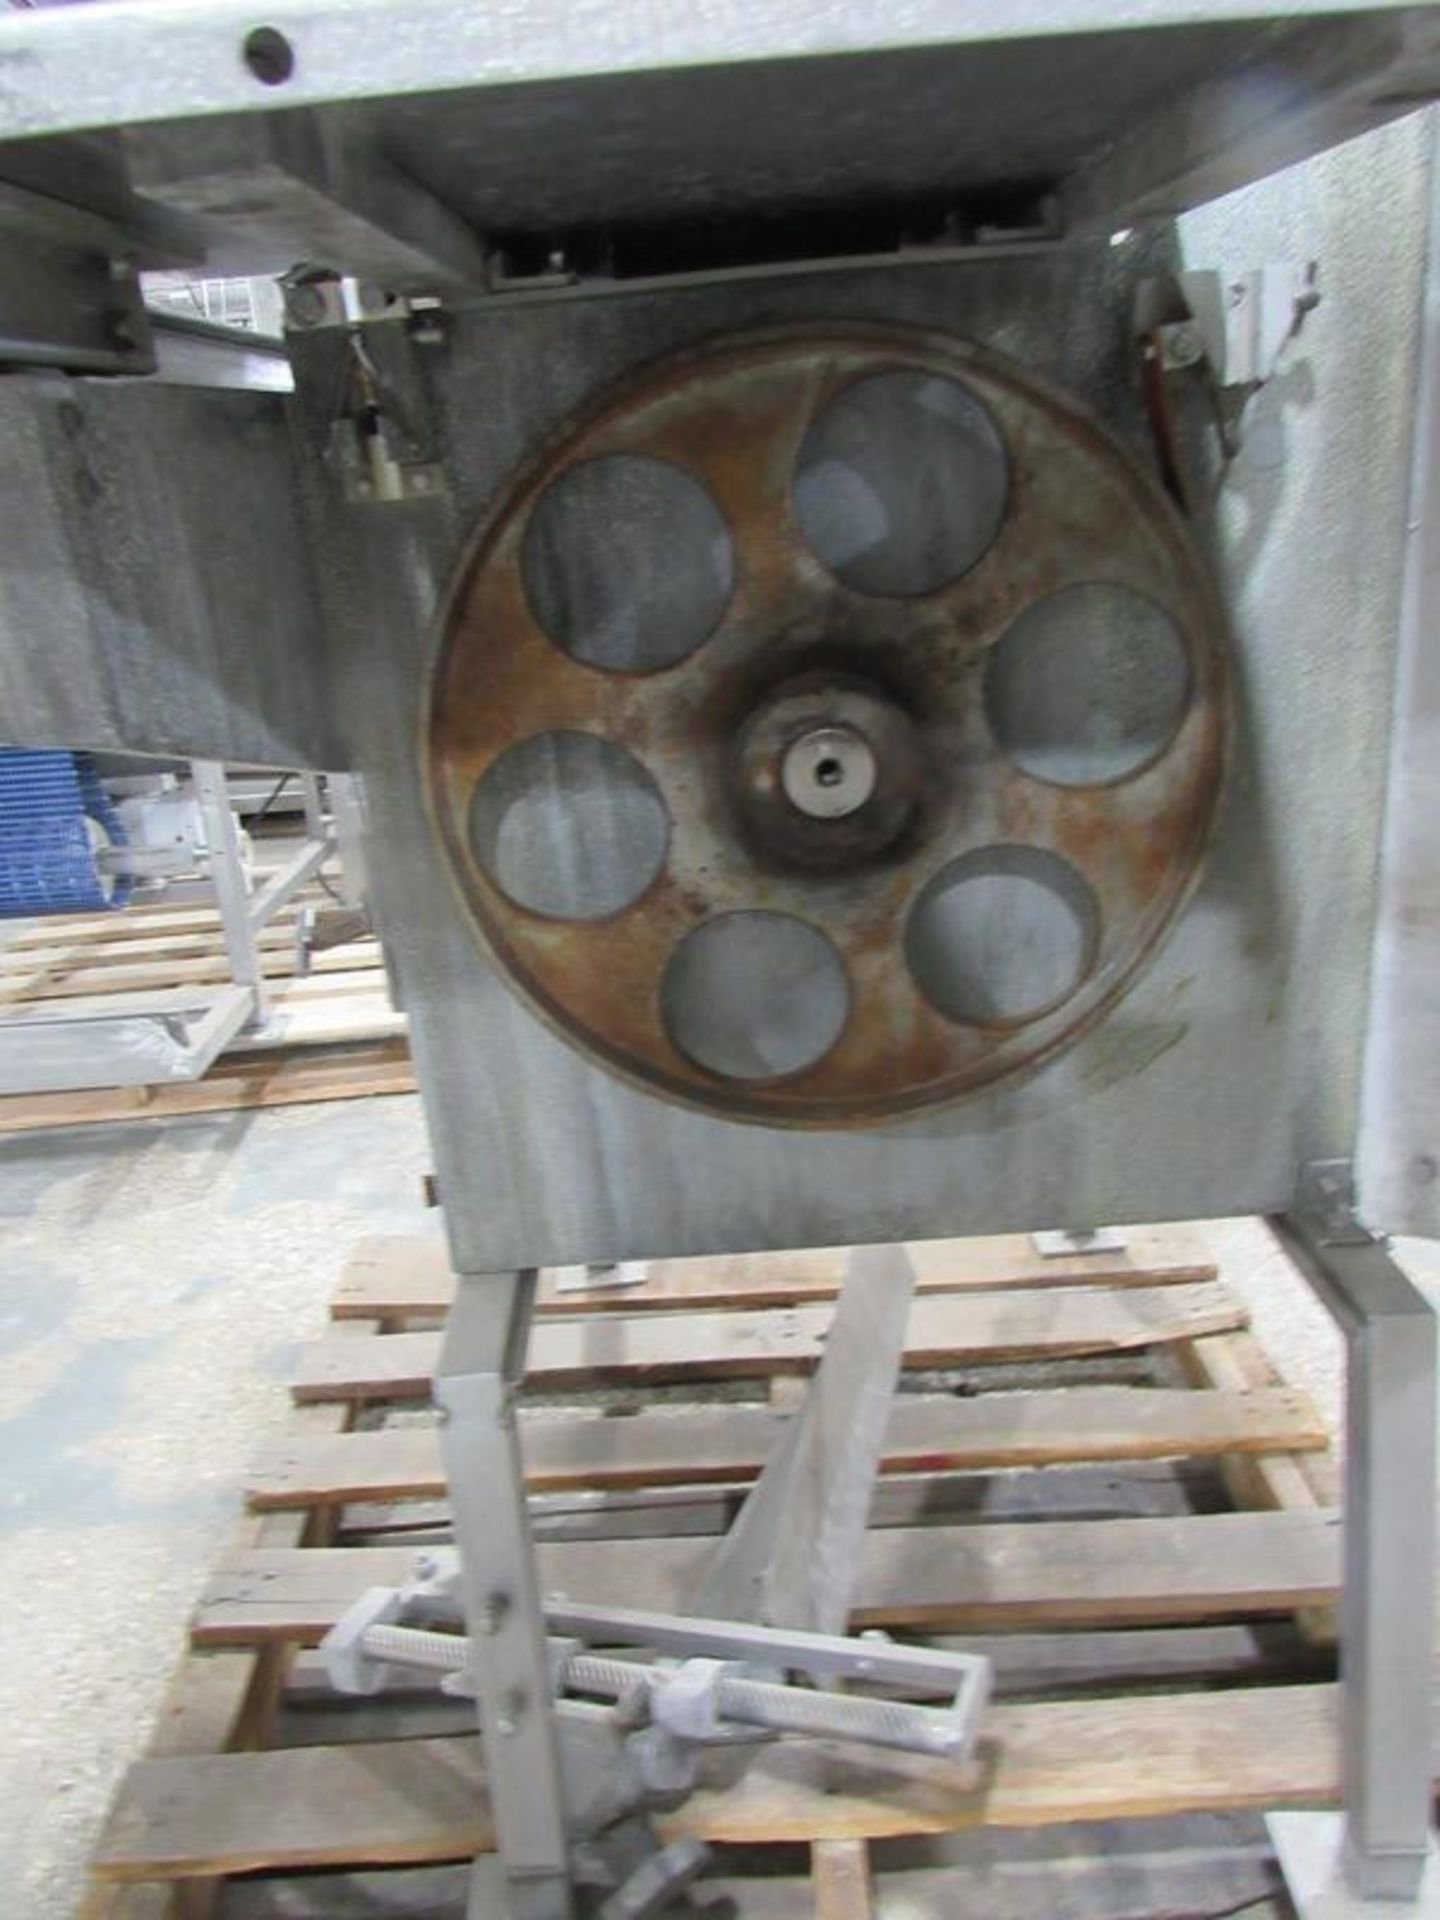 AEW Mdl. 400M Band Saw, Ser. #LHS120585 Removal: By Appointment Only. Required Rigging Fee $50.00. - Image 3 of 4